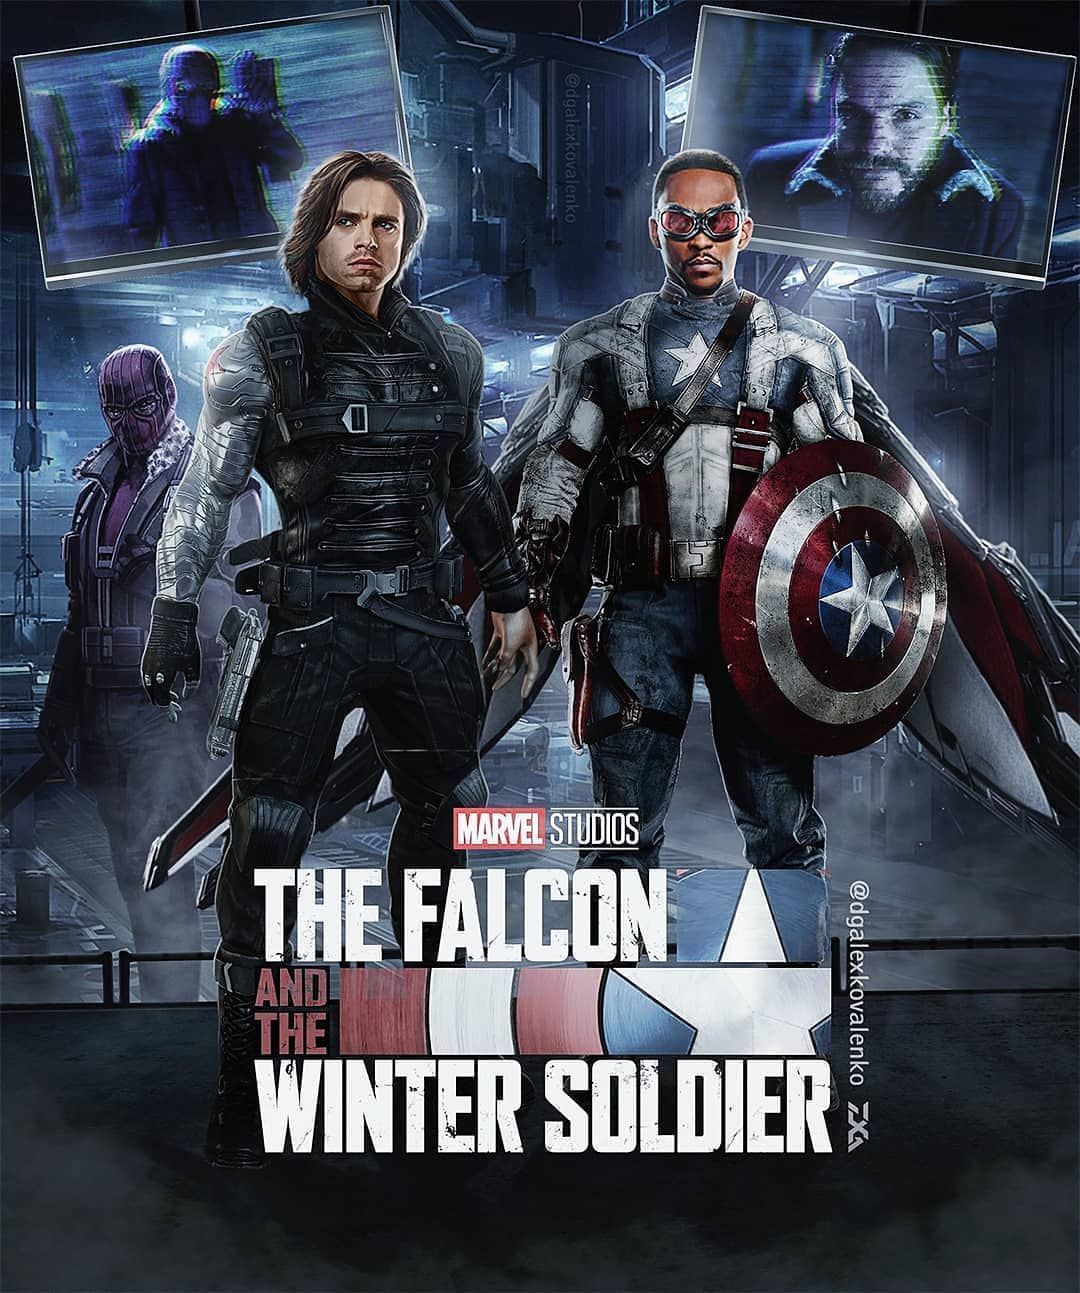 the falcon and the winter soldier 4k wallpaper, tv series on the falcon and the winter soldier wallpapers